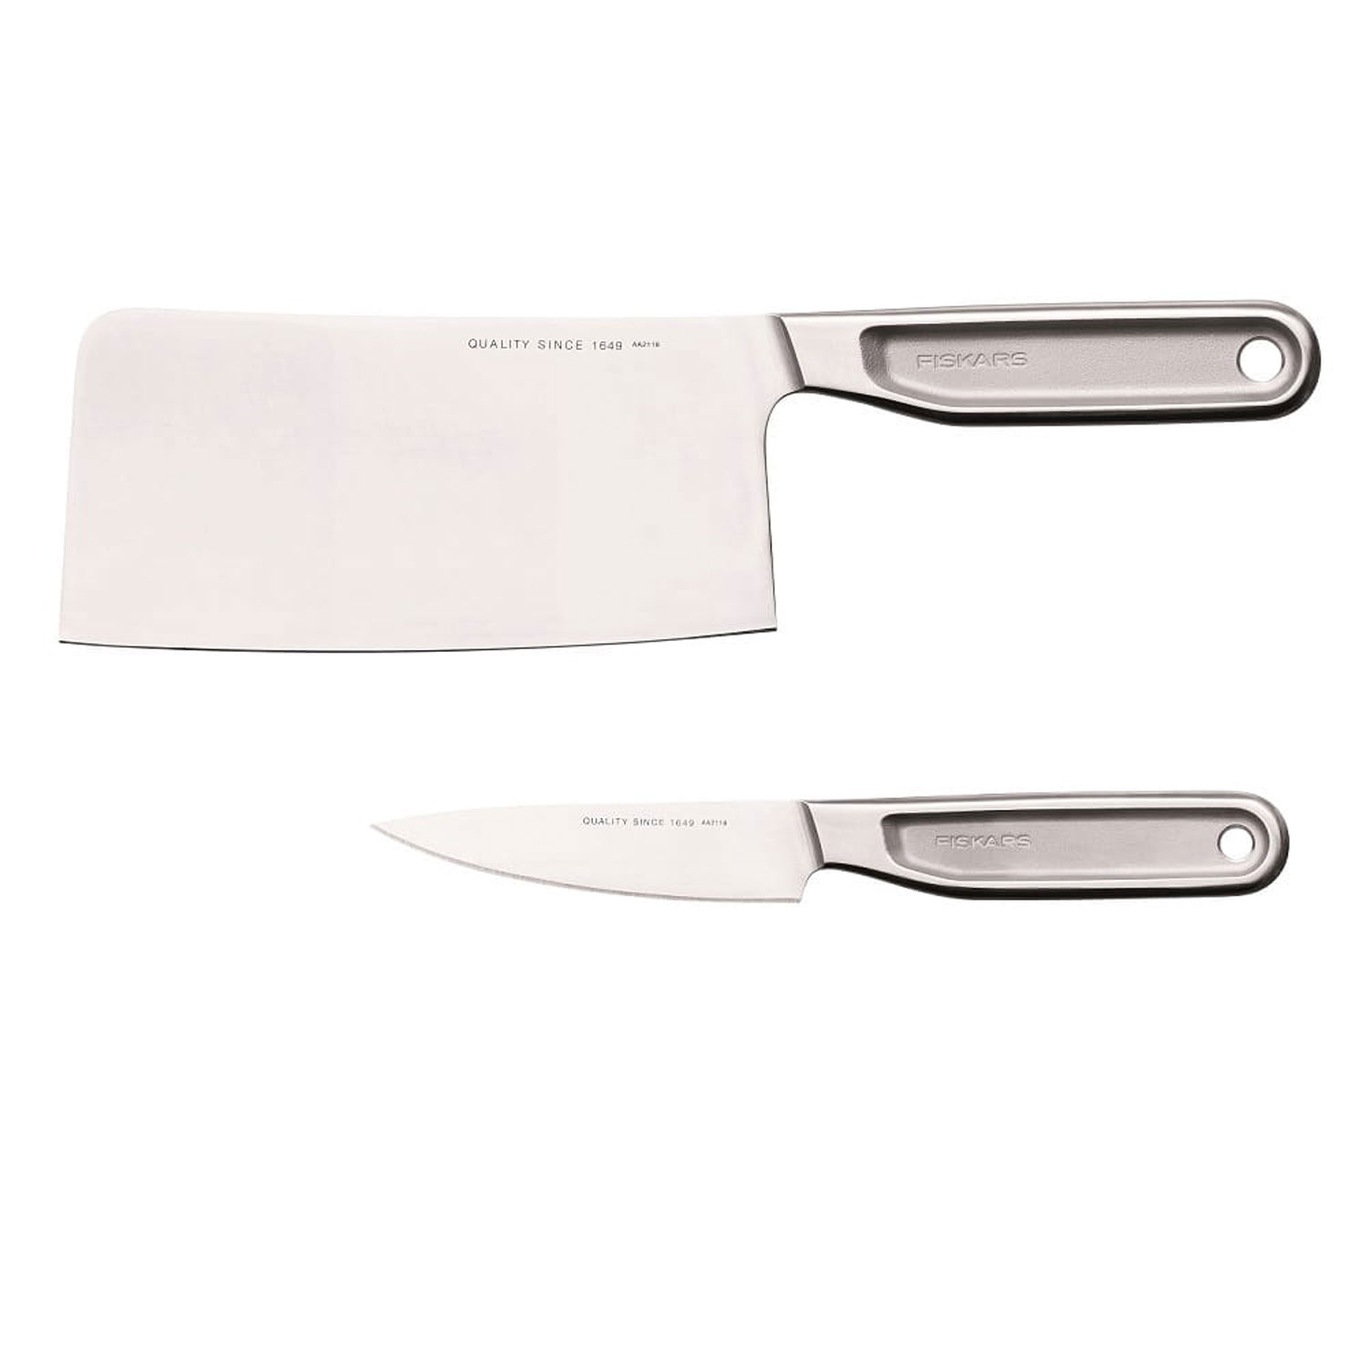 All Steel Knife Set, 2 Pieces